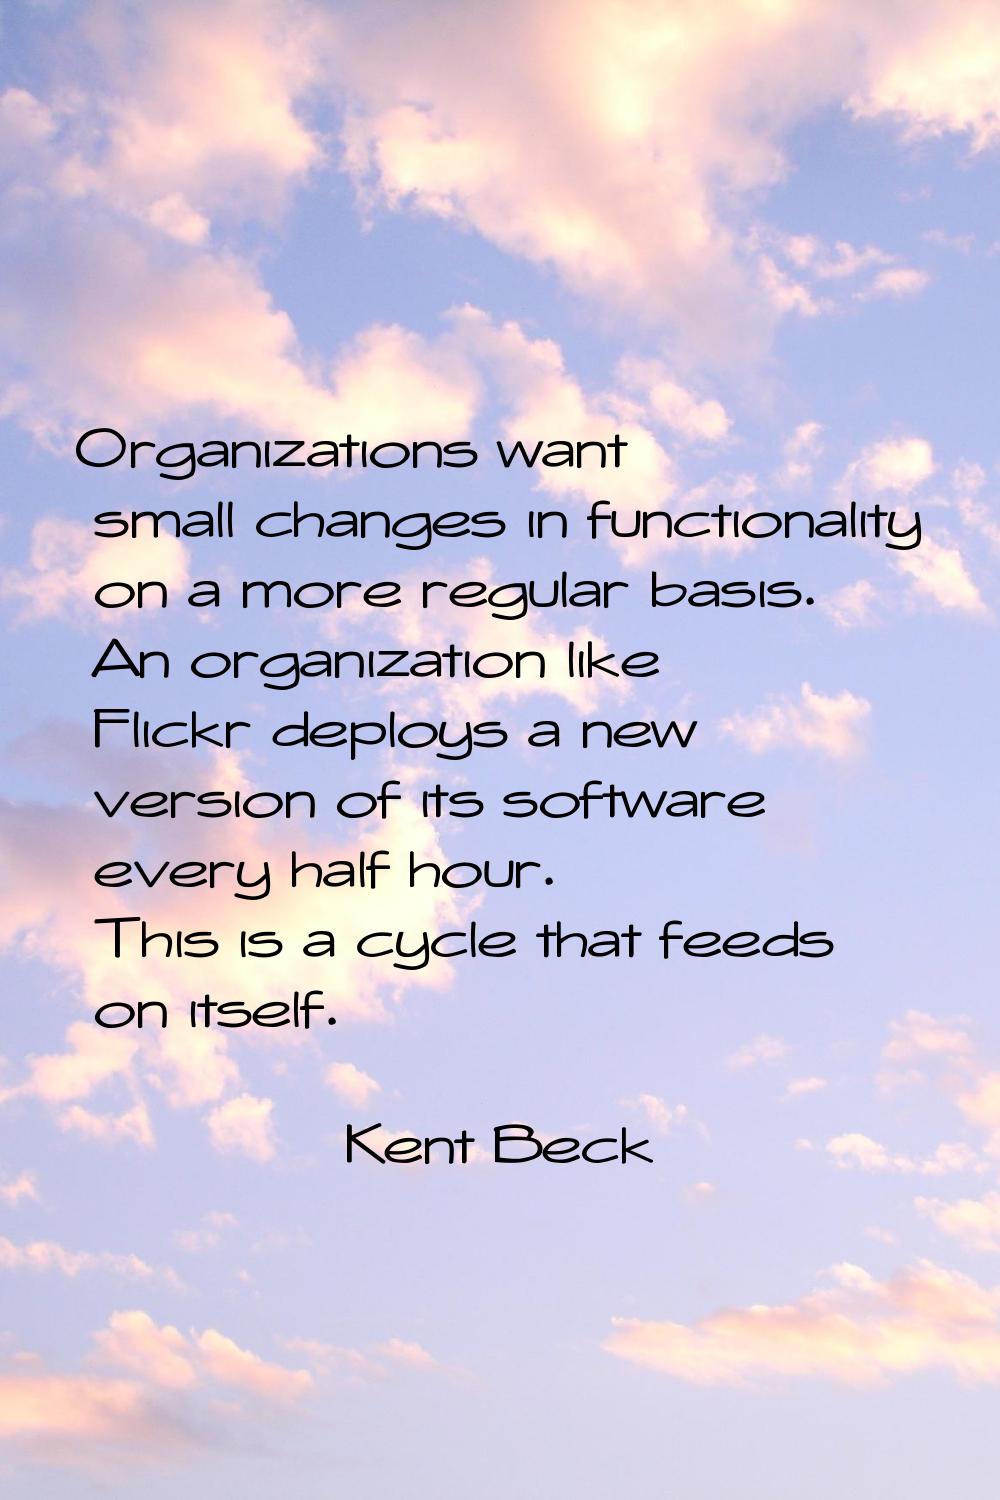 Organizations want small changes in functionality on a more regular basis. An organization like Fli